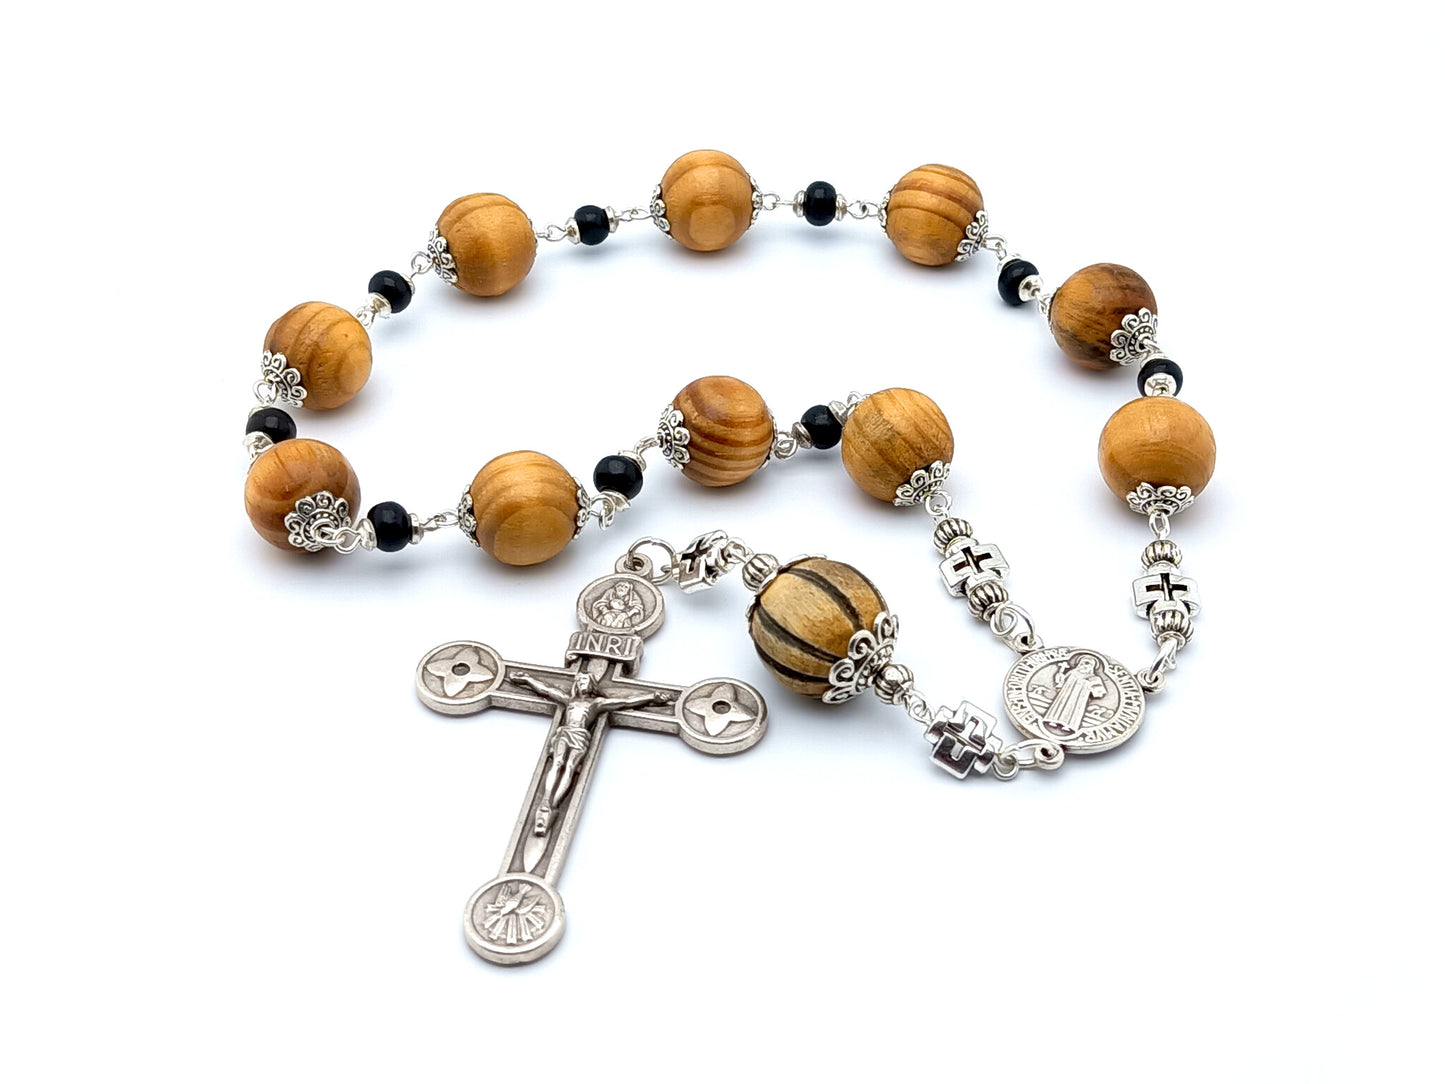 St. Benedict large wooden single decade rosary decade, tenner rosaries with Holy trinity crucifix.